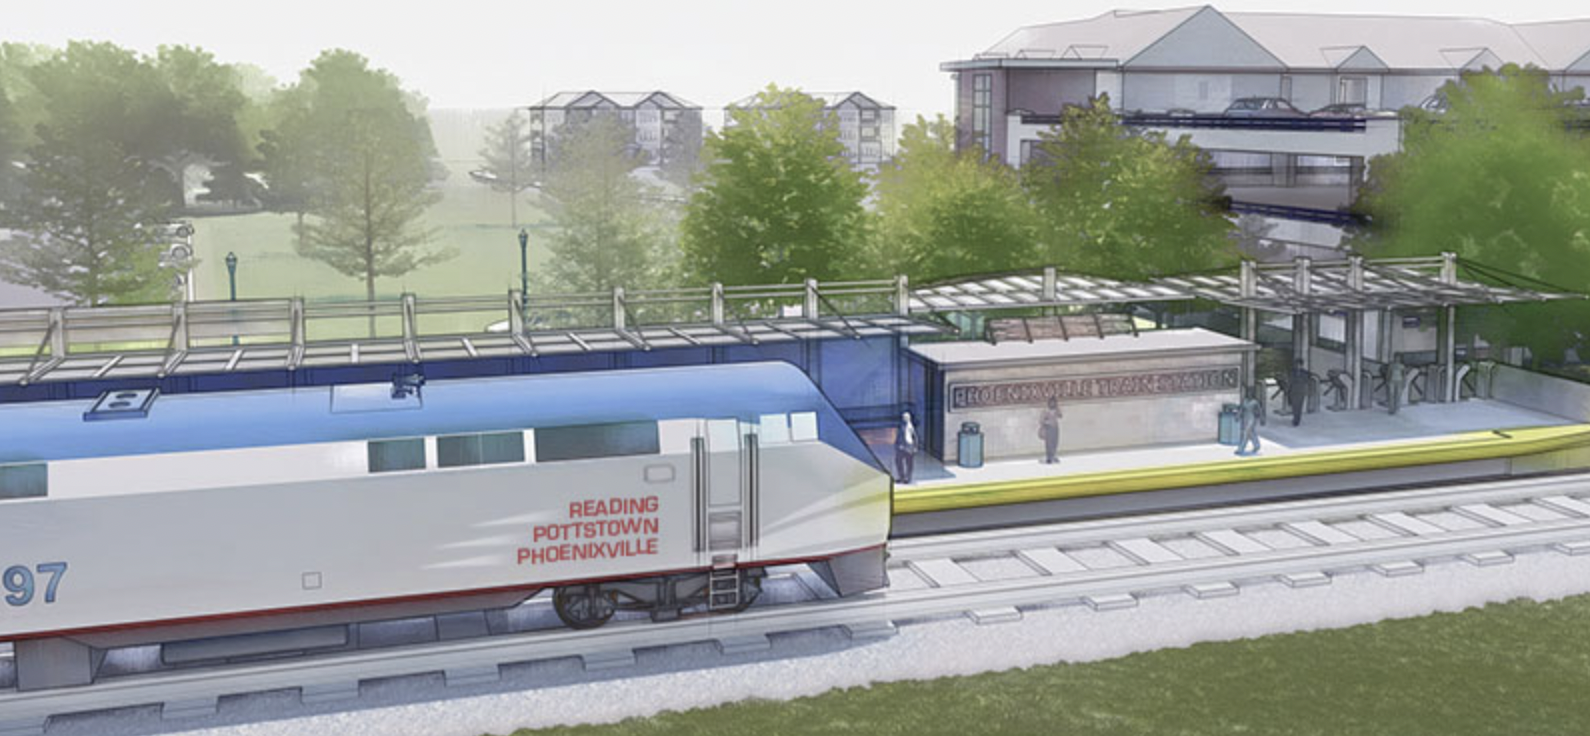 SRPRA has selected AECOM to develop a plan to restore intercity passenger rail service from Reading to Philadelphia, Pa. (SRPRA Rendering)